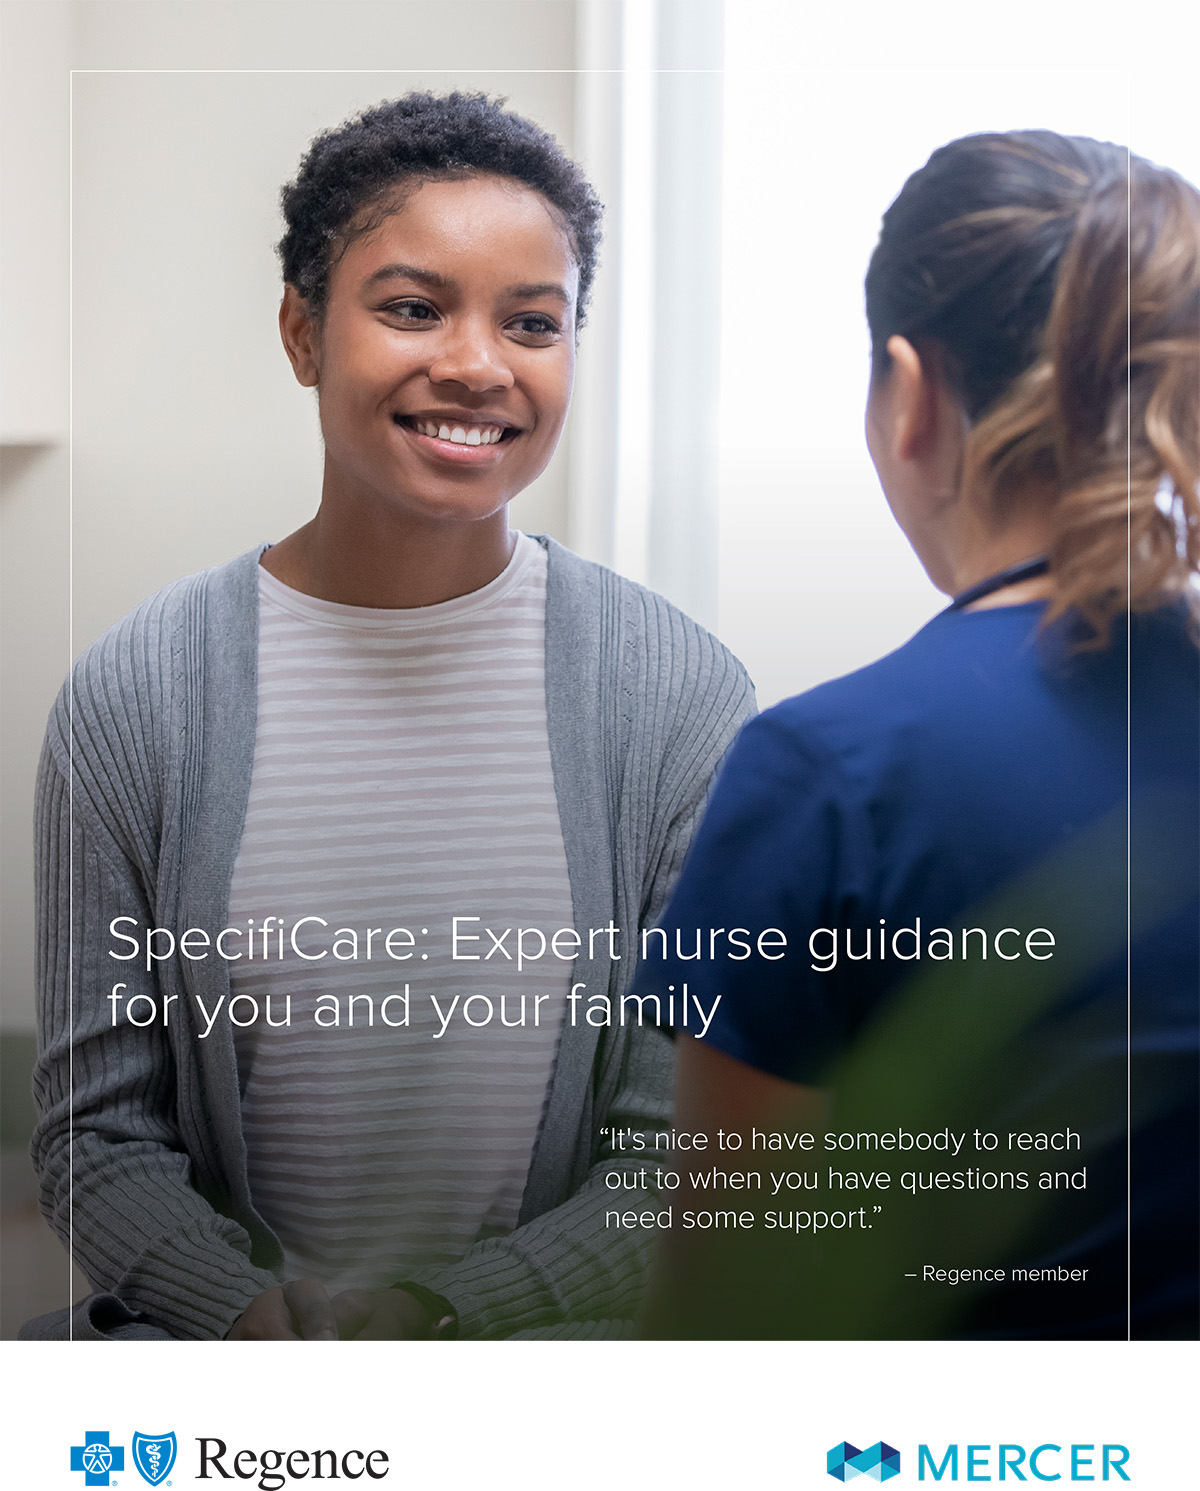 SpecifiCare: Expert nurse guidance for you and your family